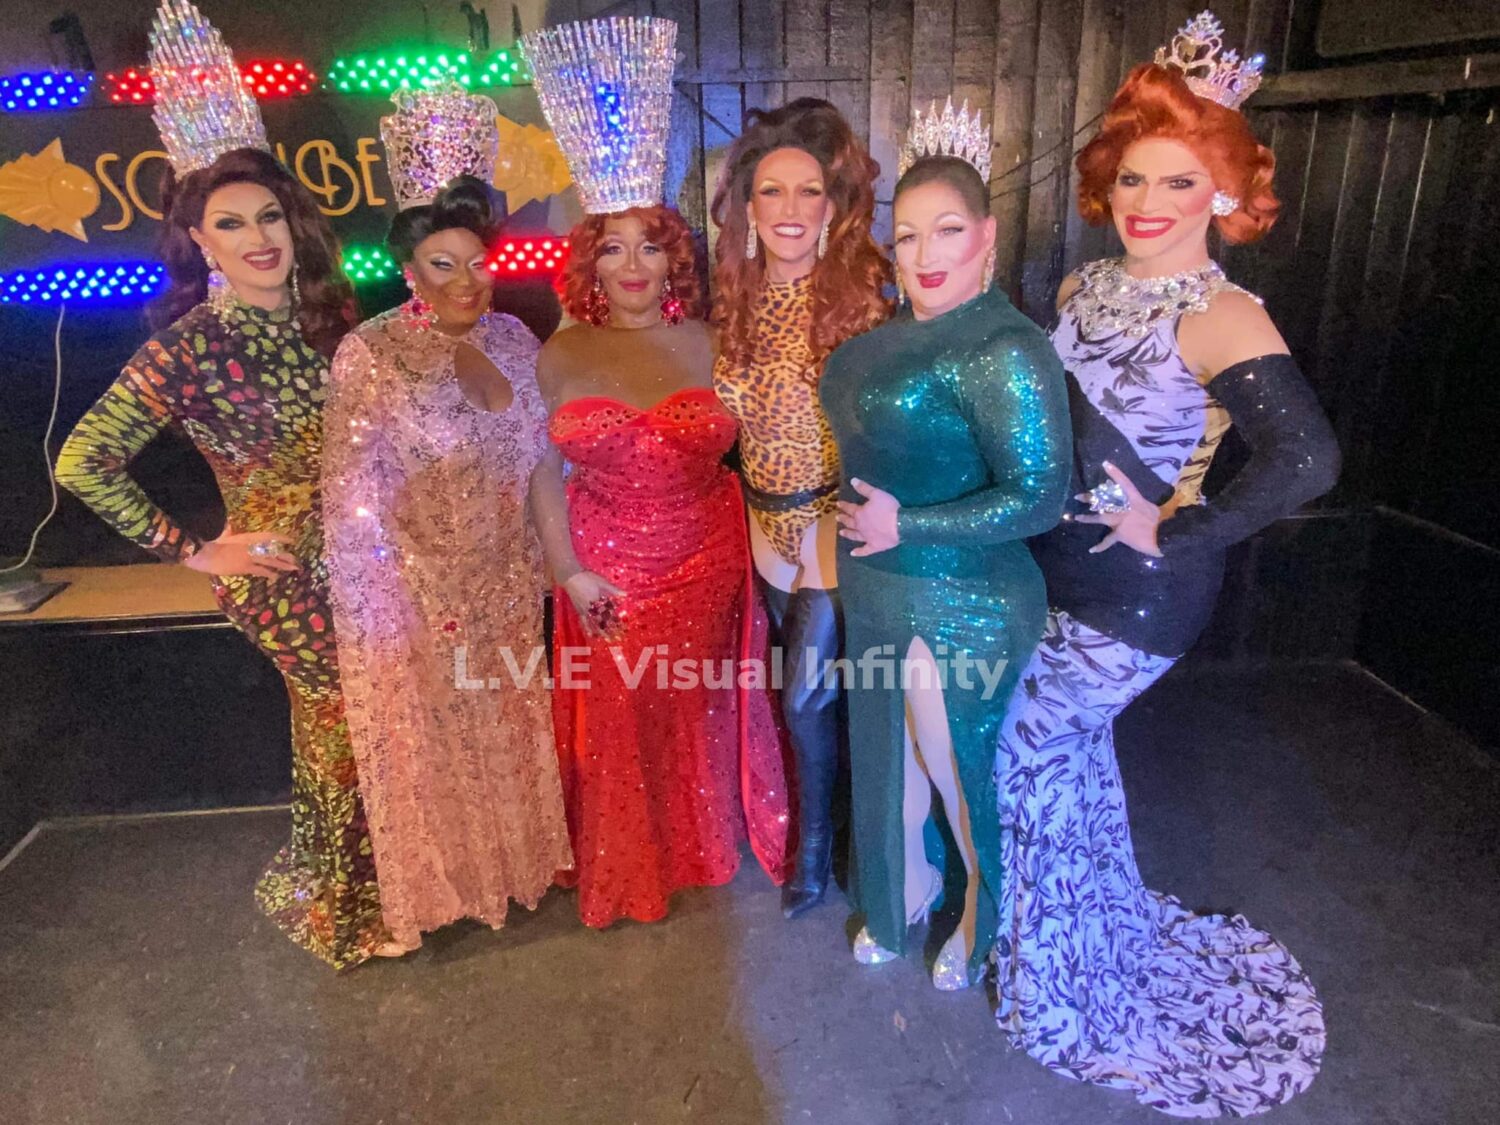 Anaslaysia Annejob, Bianca Bouvier, Tracie Lords, Jennifer Lynn Ali, Traci Von Trapp and Ava Aurora Foxx | Miss Southbend Classic Pageant | Southbend Tavern (Columbus, Ohio) | 2/27/2022 | Photo by L.V.E Visual Infinity